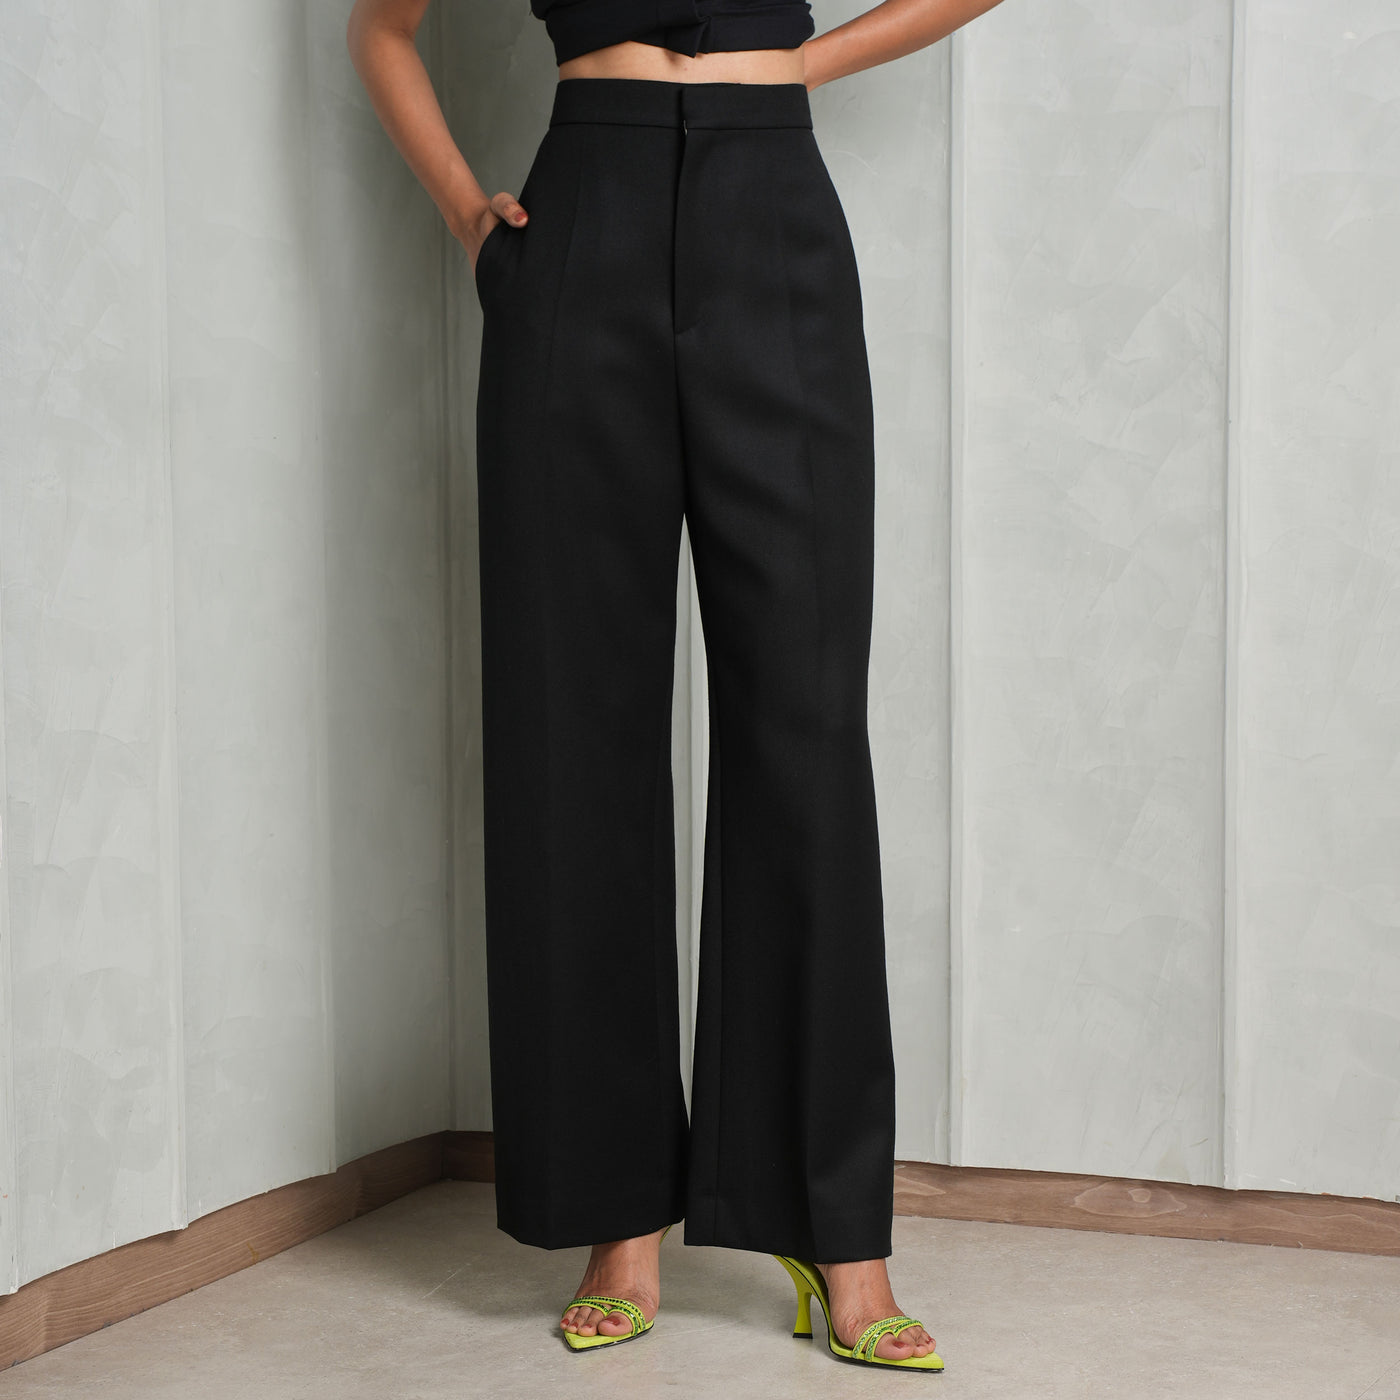 LOEWE black High Waisted trousers with wide leg